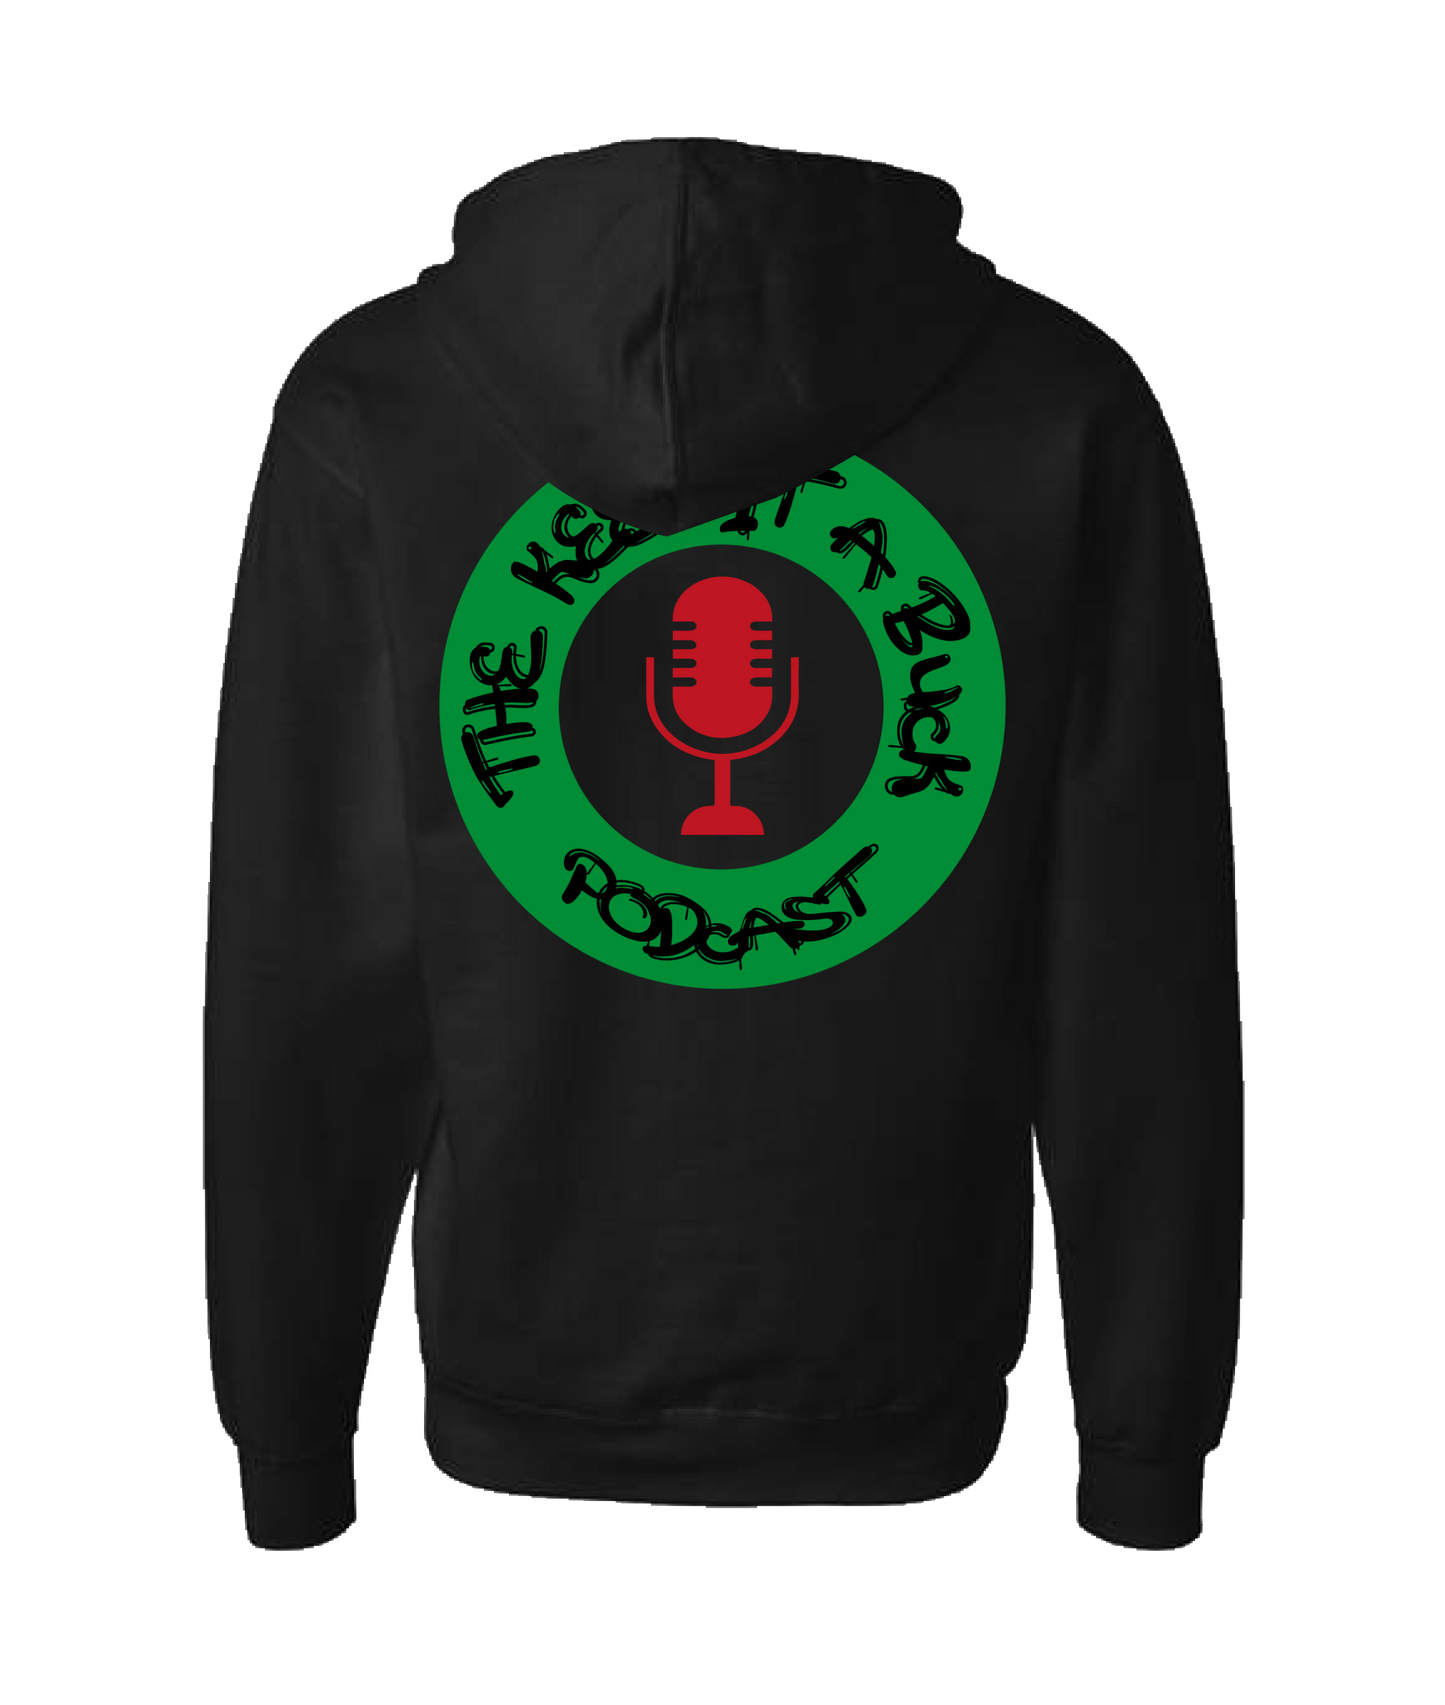 The Buck Store - The Keep it a Buck Podcast Round Logo - Black Zip Up Hoodie